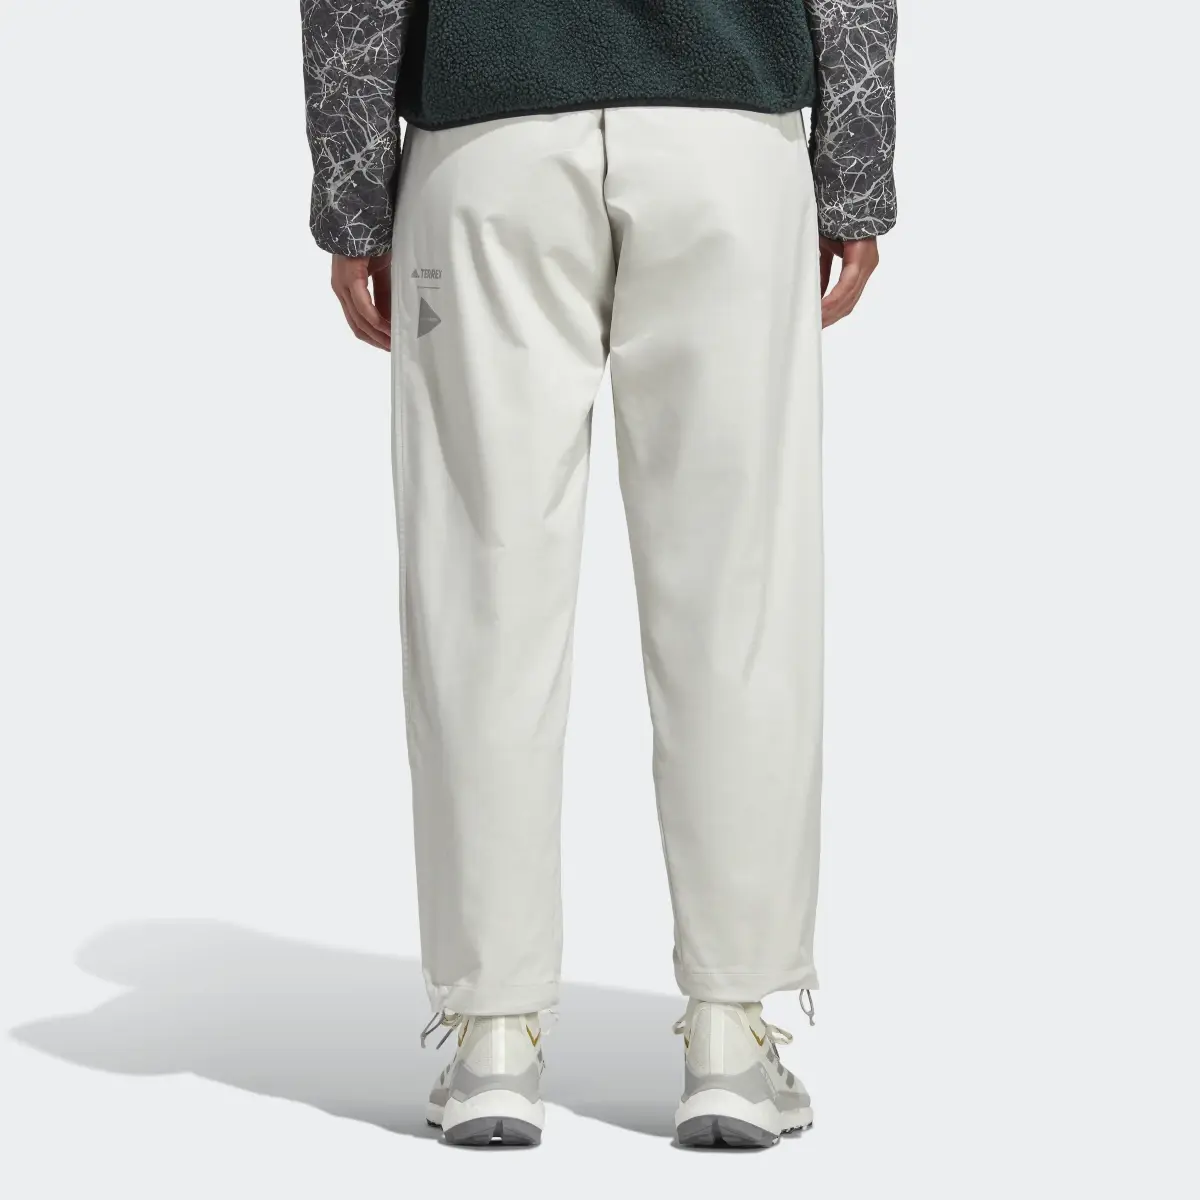 Adidas Terrex x and wander Trousers. 2